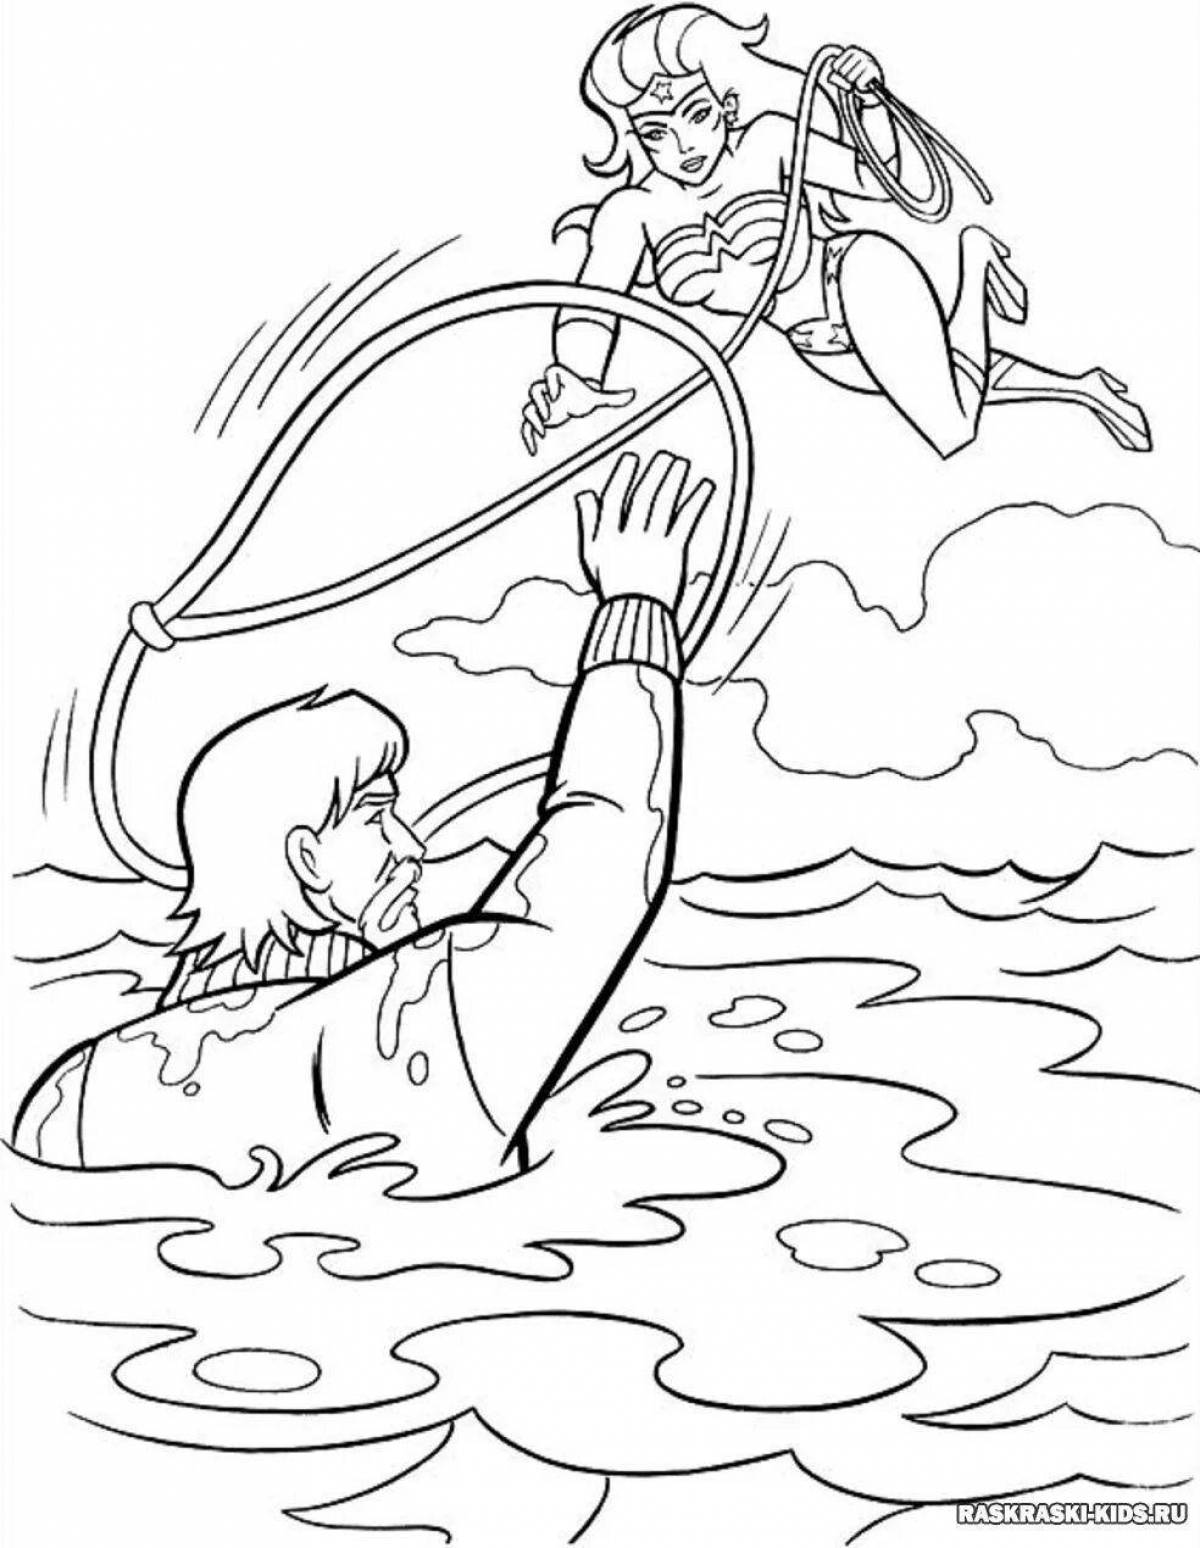 Adorable water safety coloring page